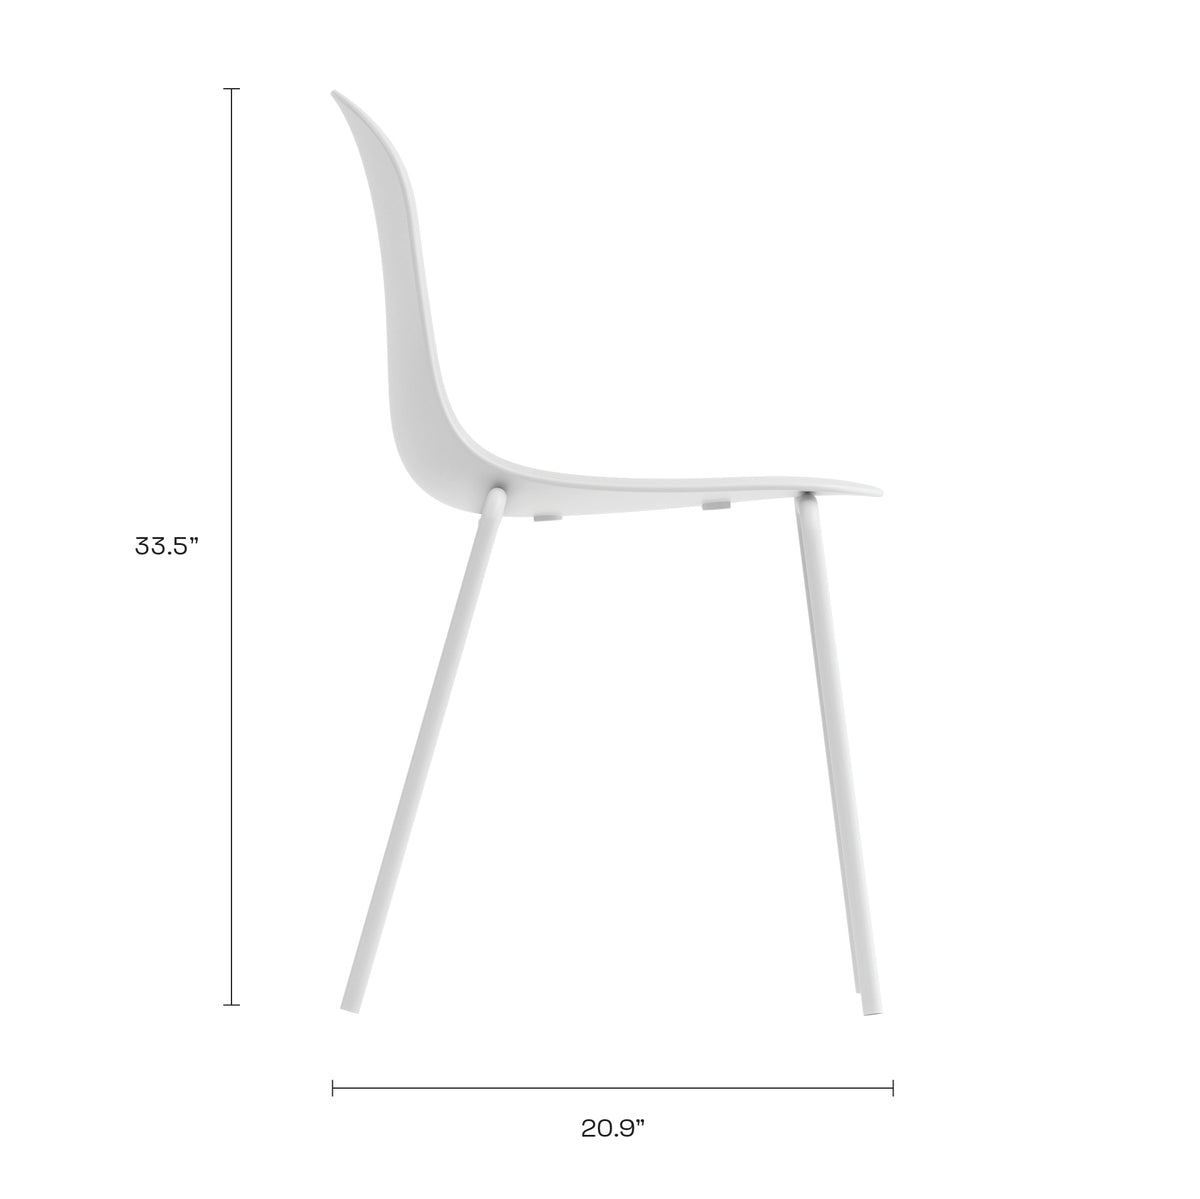 serena-stackable-chair-with-steel-frame-white-set-of-4